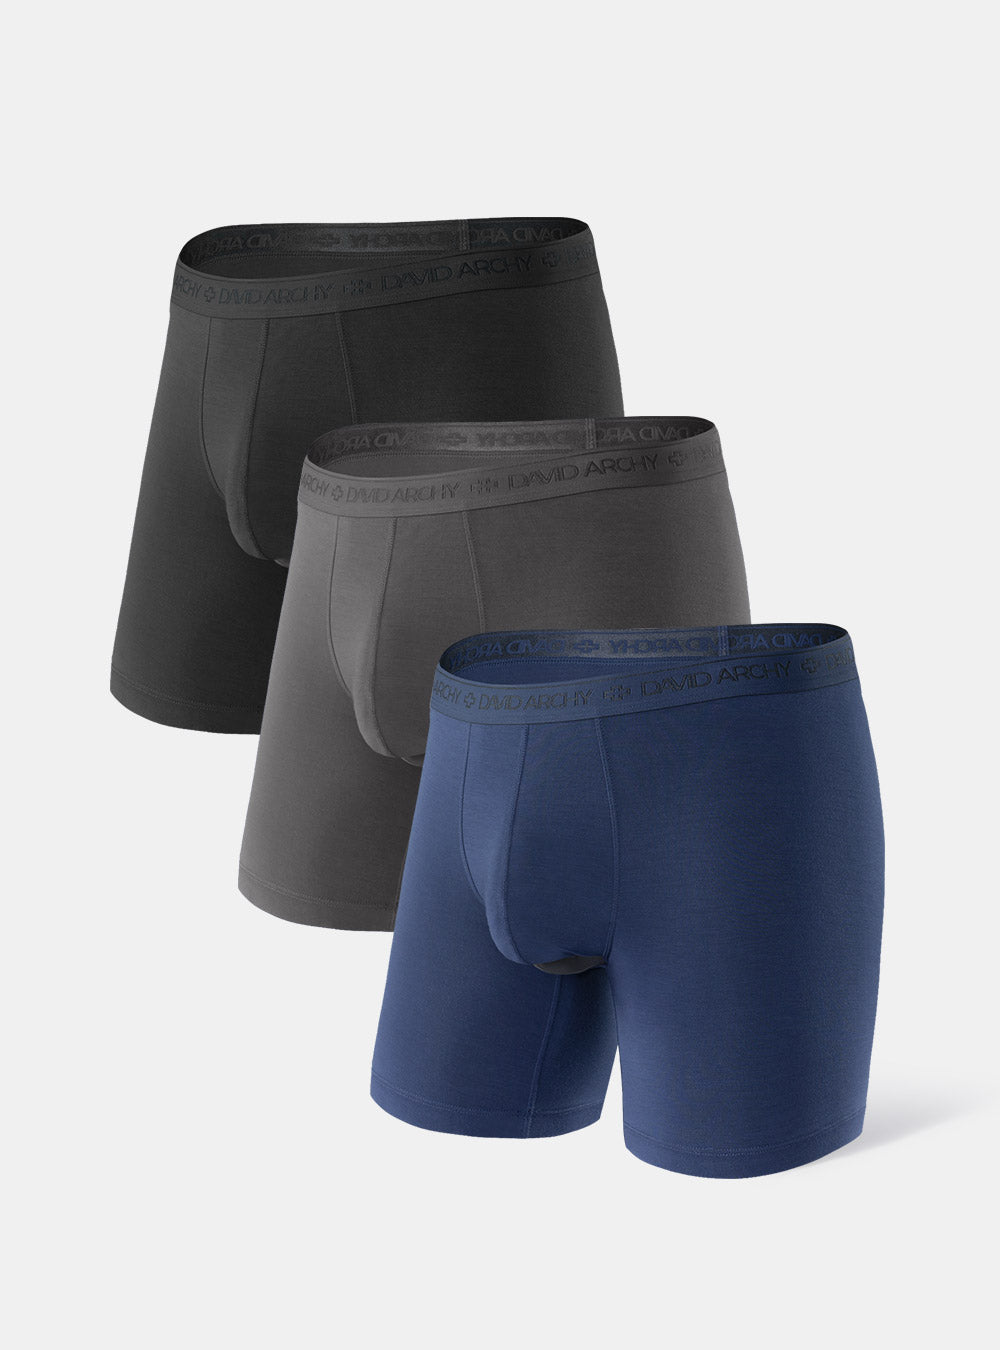 David Archy Clothing - Experience the epitome of elegance with David Archy  Underwear - lightweight, breathable, antimicrobial, and quick-drying.  Elevate your style and embrace unrivaled comfort, making you not only look  incredibly